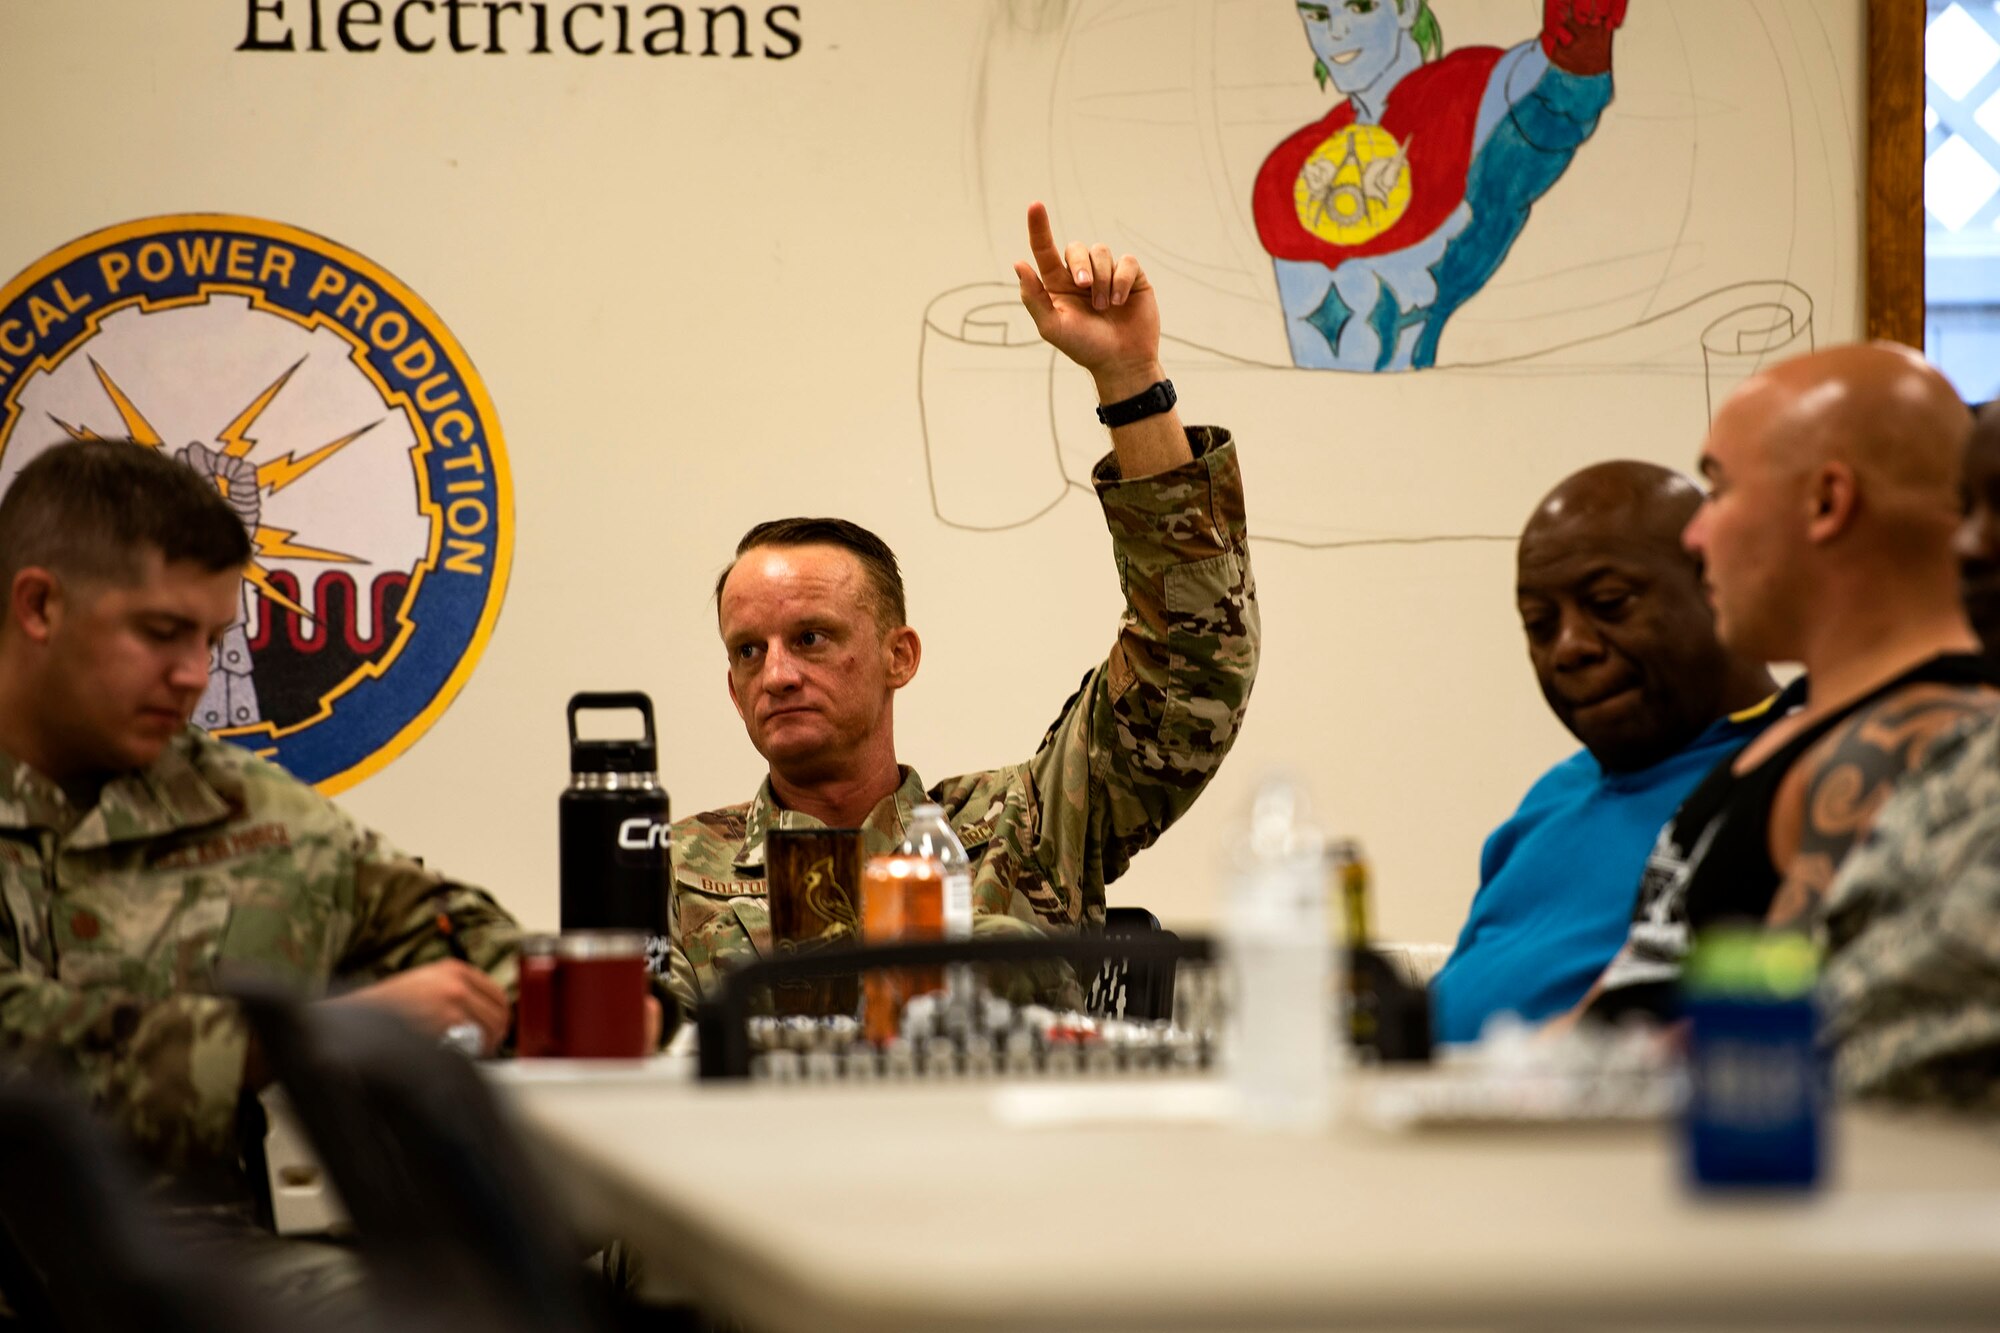 Senior Master Sgt. Noah Bolton, 23d Civil Engineer Squadron readiness & emergency flight chief, raises his hand during resiliency training Sept. 10, 2019, at Moody Air Force Base, Ga. The event was hosted by the 23d Wing chaplain, and served as an interactive experience for Airmen, providing practical approaches they can use regularly to improve the resiliency culture in their squadrons. (U.S. Air Force photo by Senior Airman Erick Requadt)